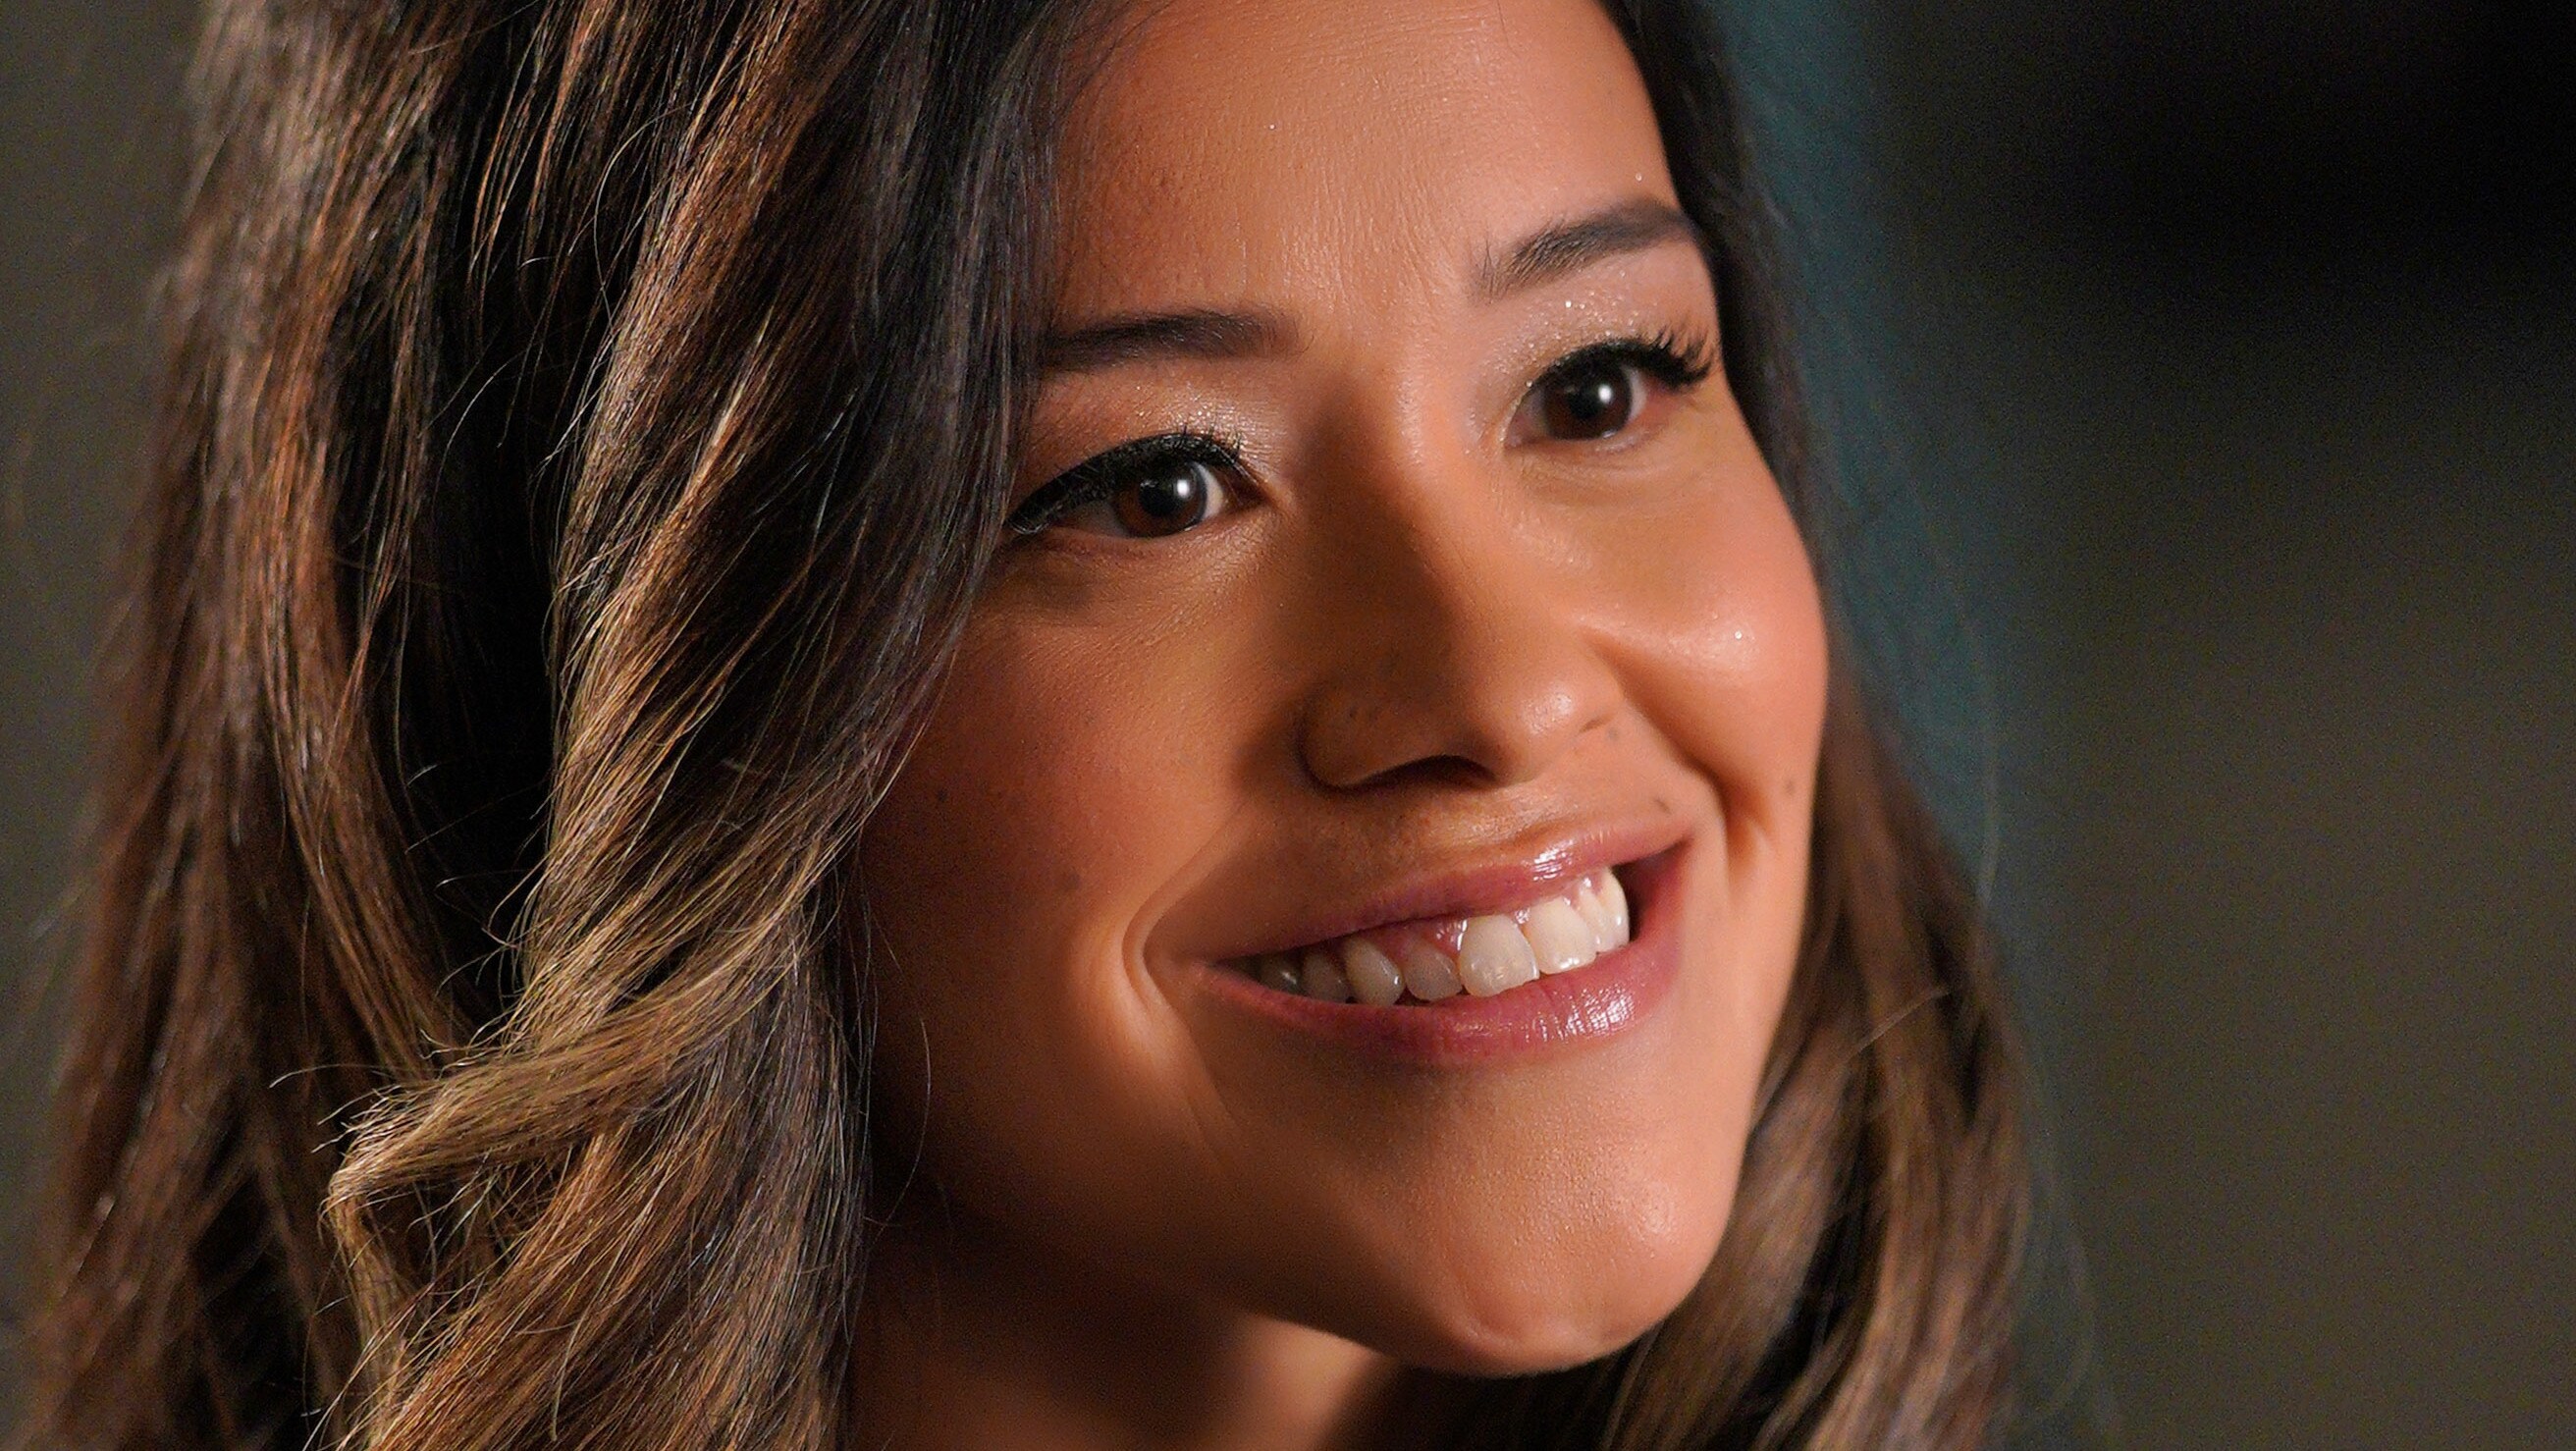 DIARY OF A FUTURE PRESIDENT - “Episode 201 - Back In Session” (Disney/Christopher Willard) GINA RODRIGUEZ